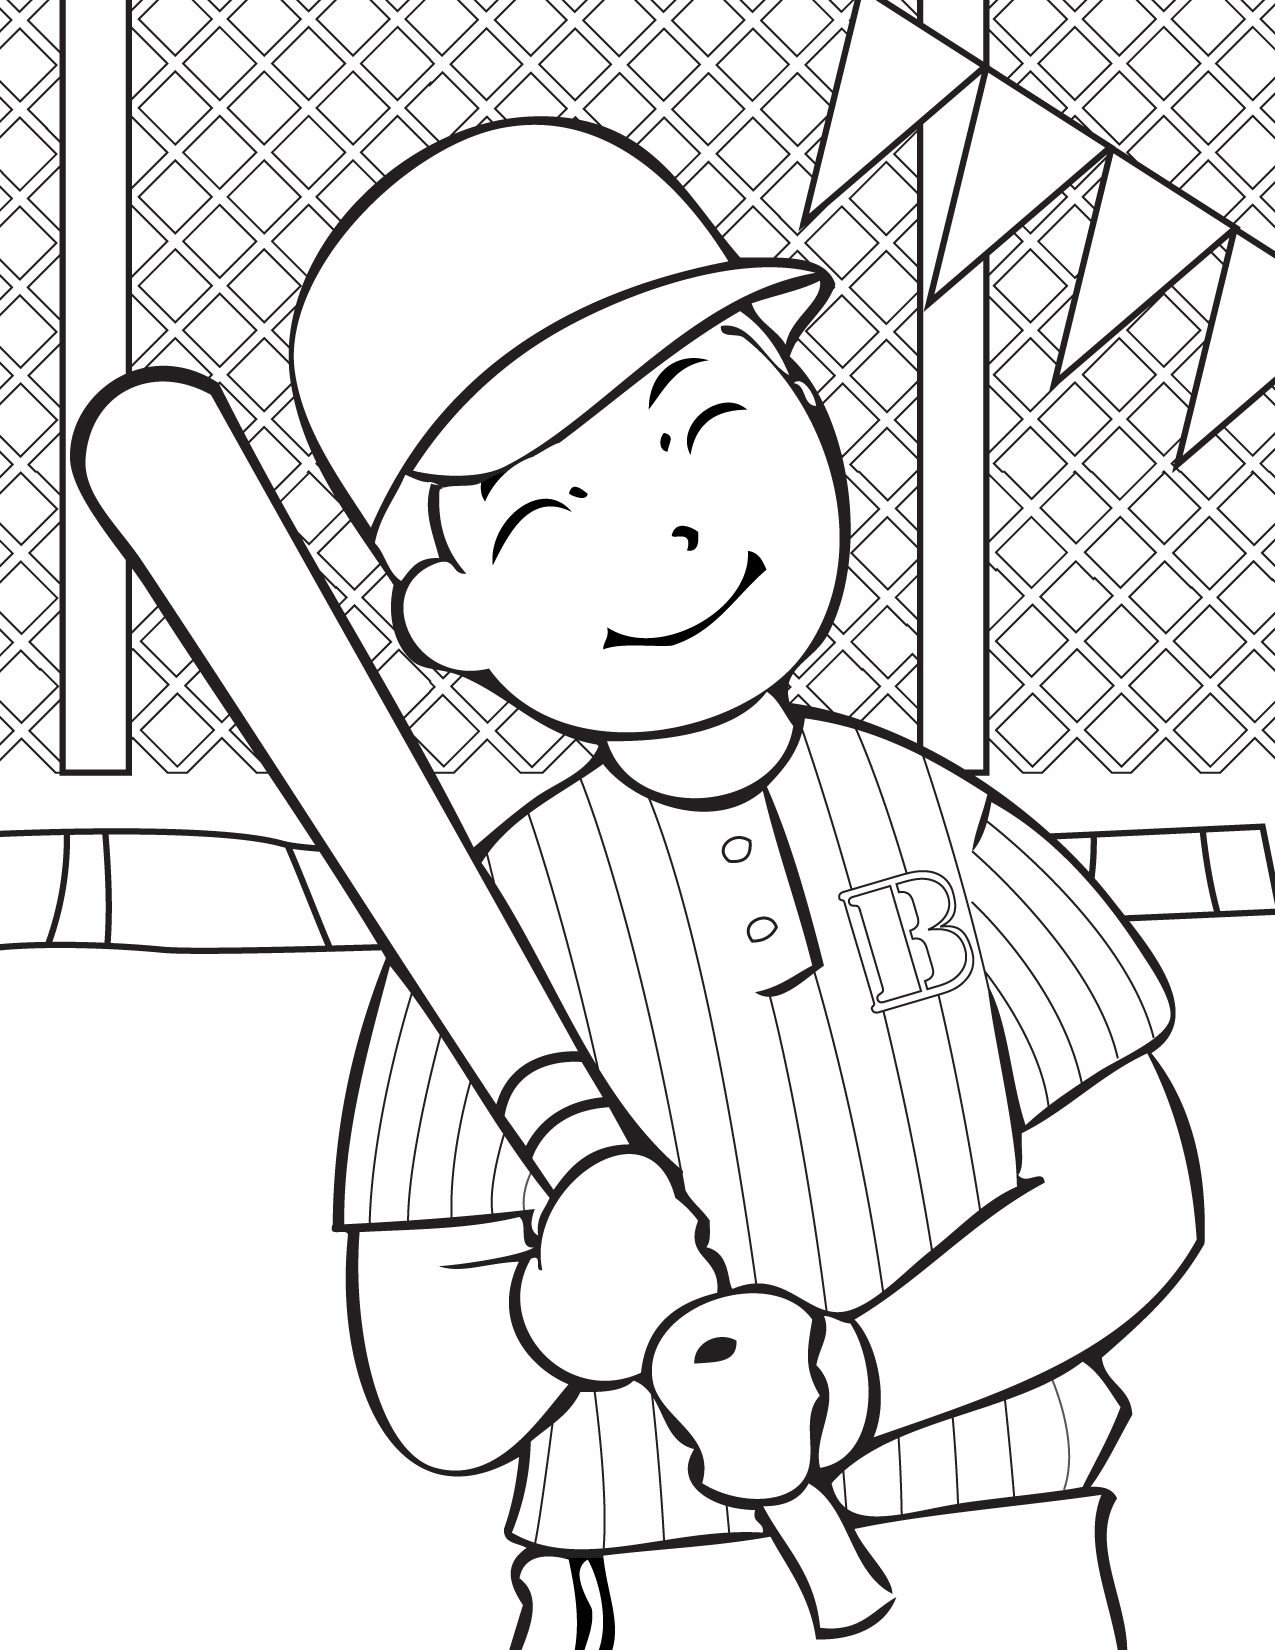 Download Free Printable Baseball Coloring Pages for Kids - Best ...